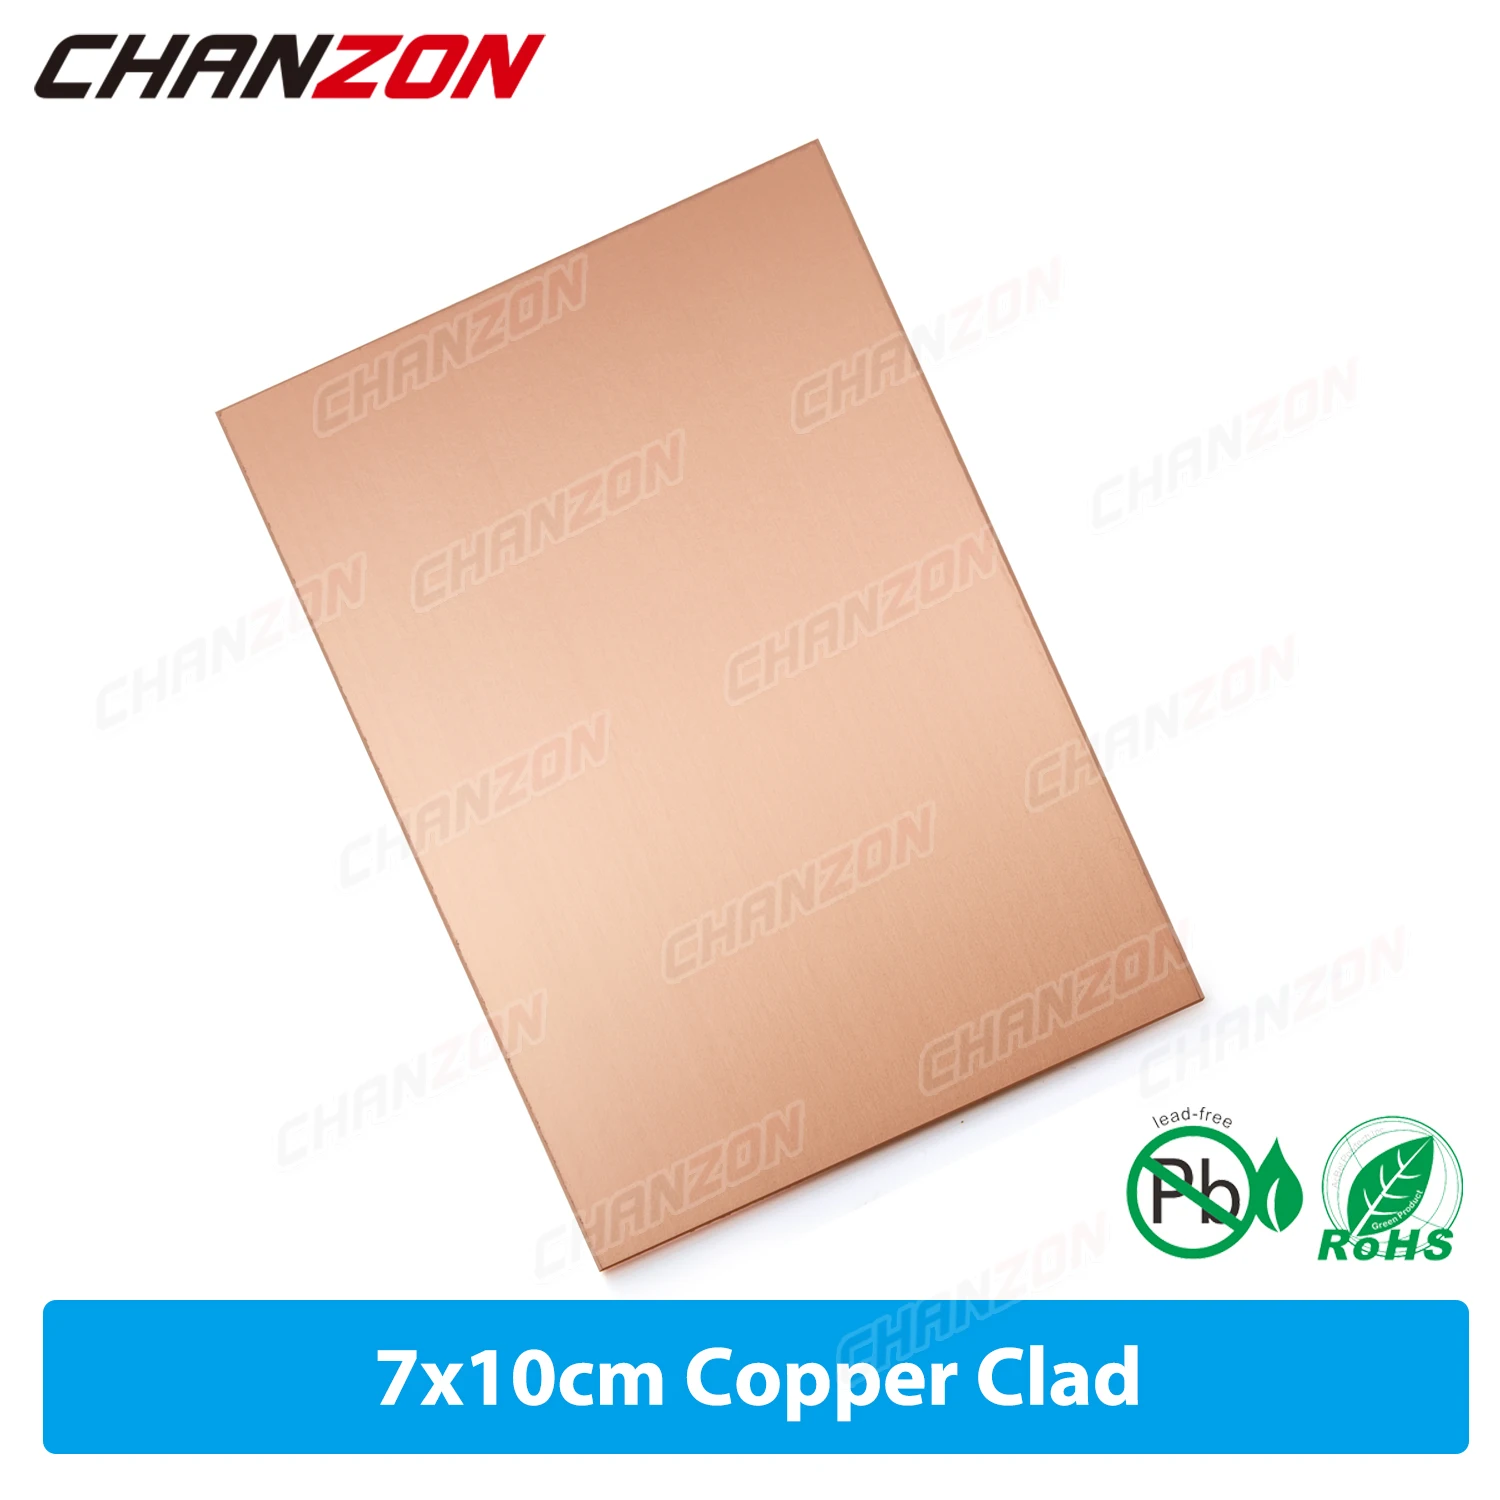 10Pcs 7x10 cm FR4 Single Sided Copper Plated Clad Laminate Universal Circuit Prototype FR-4 Flexible PCB Board for Etching DIY |